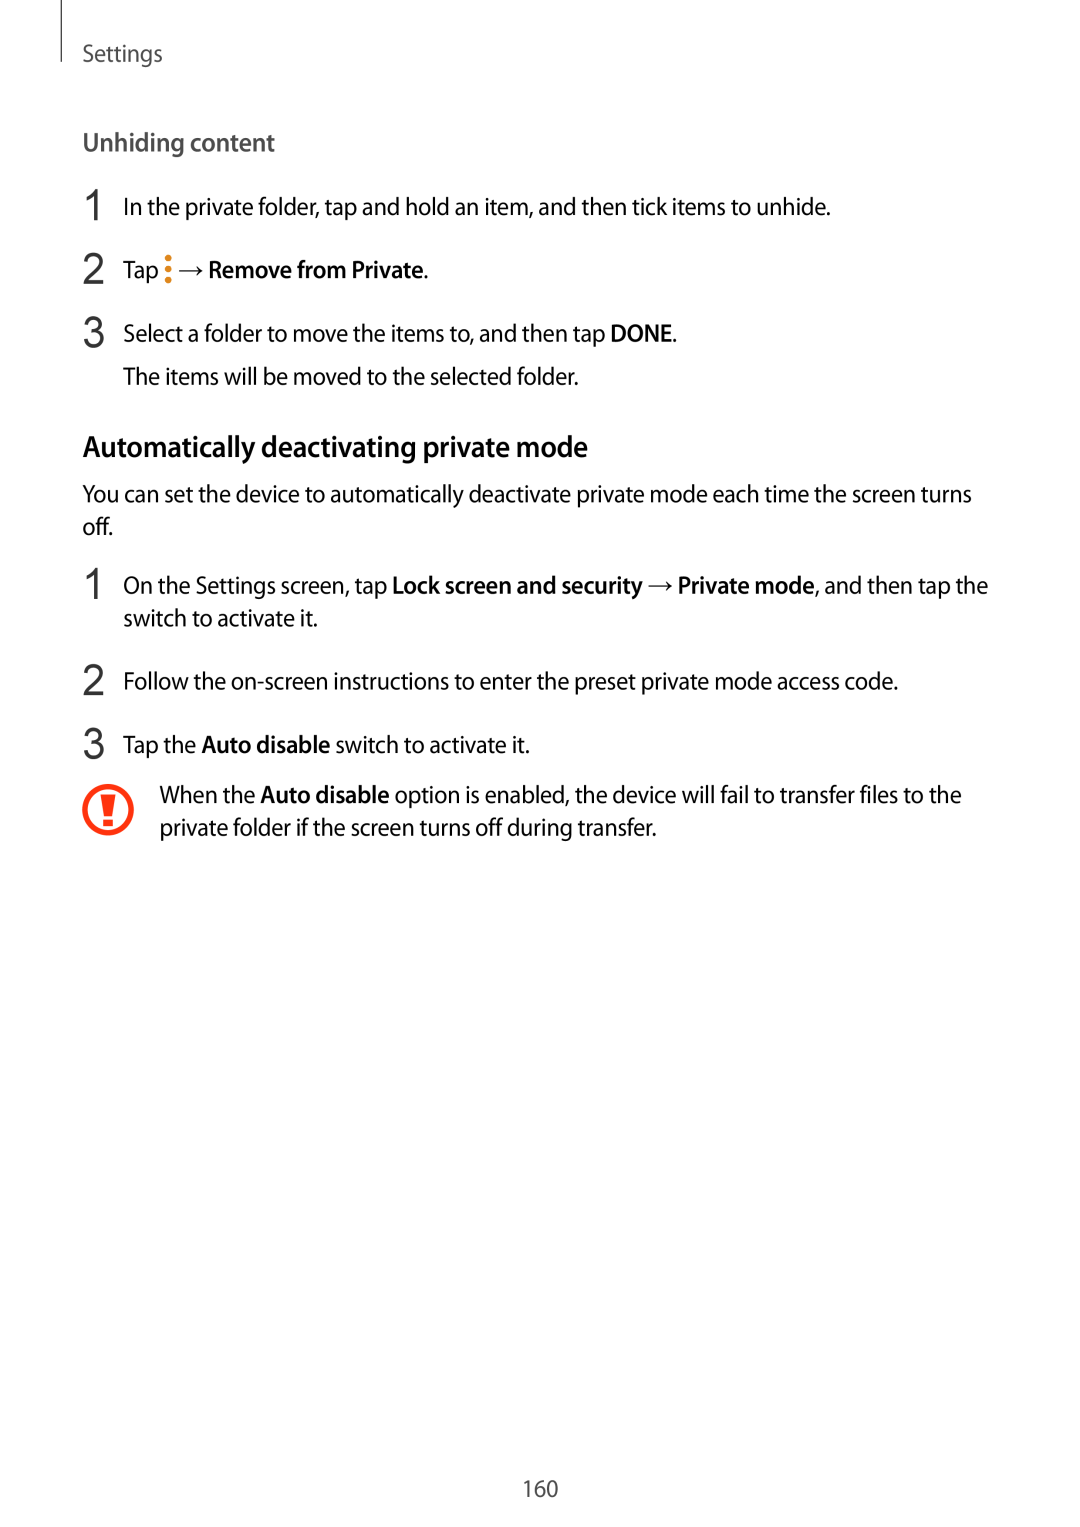 Samsung SM-G928FZKANEE manual Automatically deactivating private mode, Unhiding content, Tap →Remove from Private, Settings 